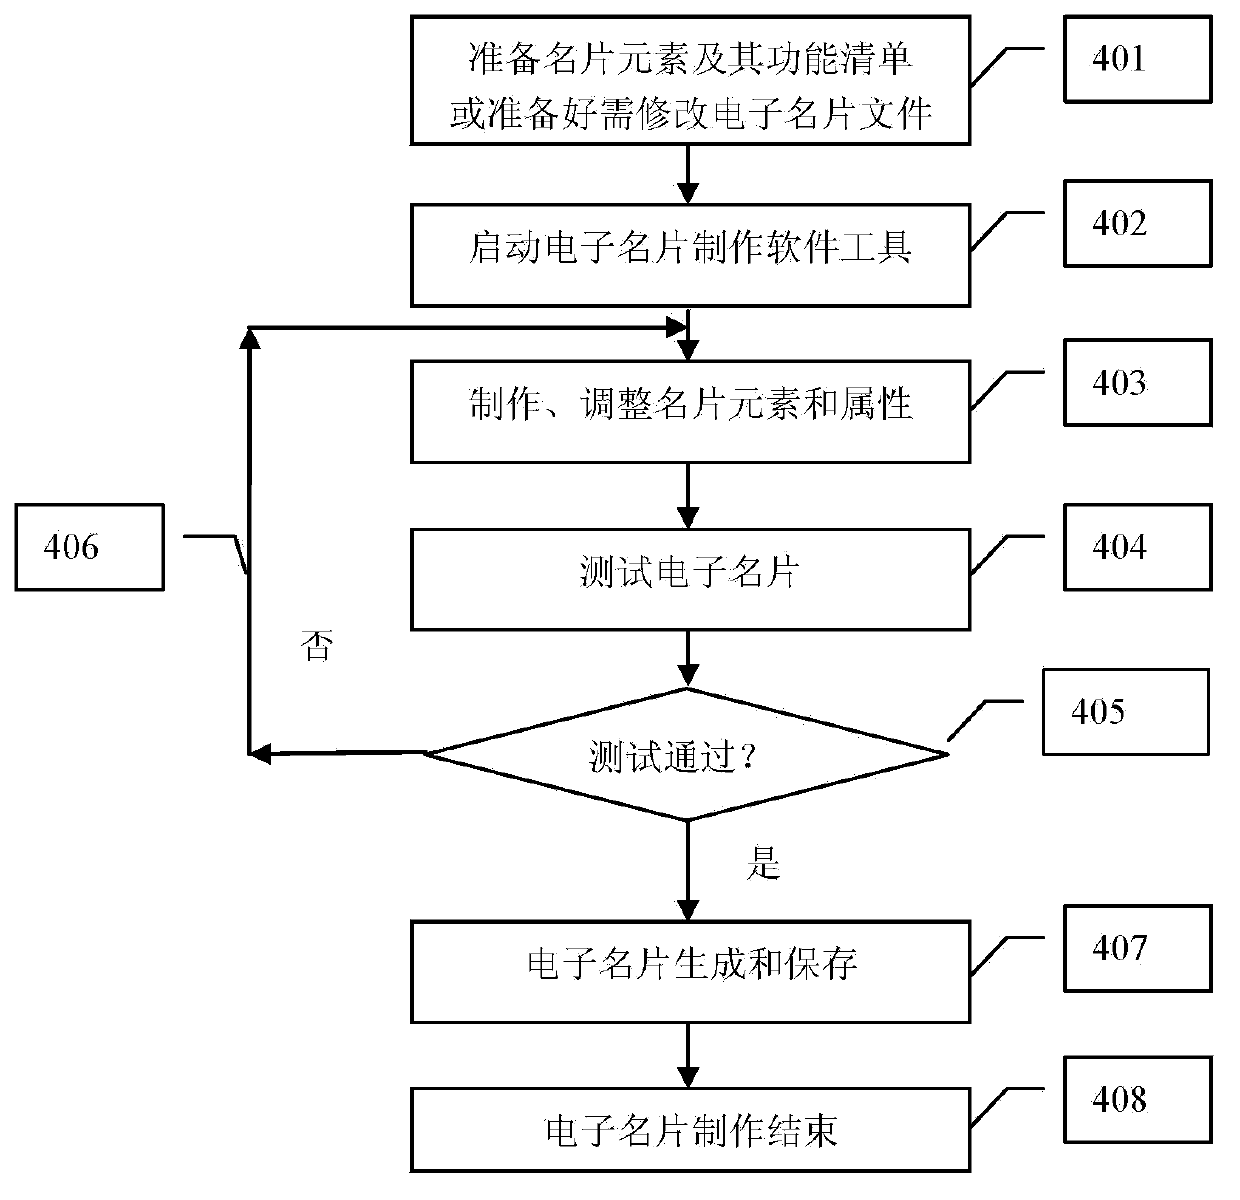 Novel electronic business card manufacture, display and use method